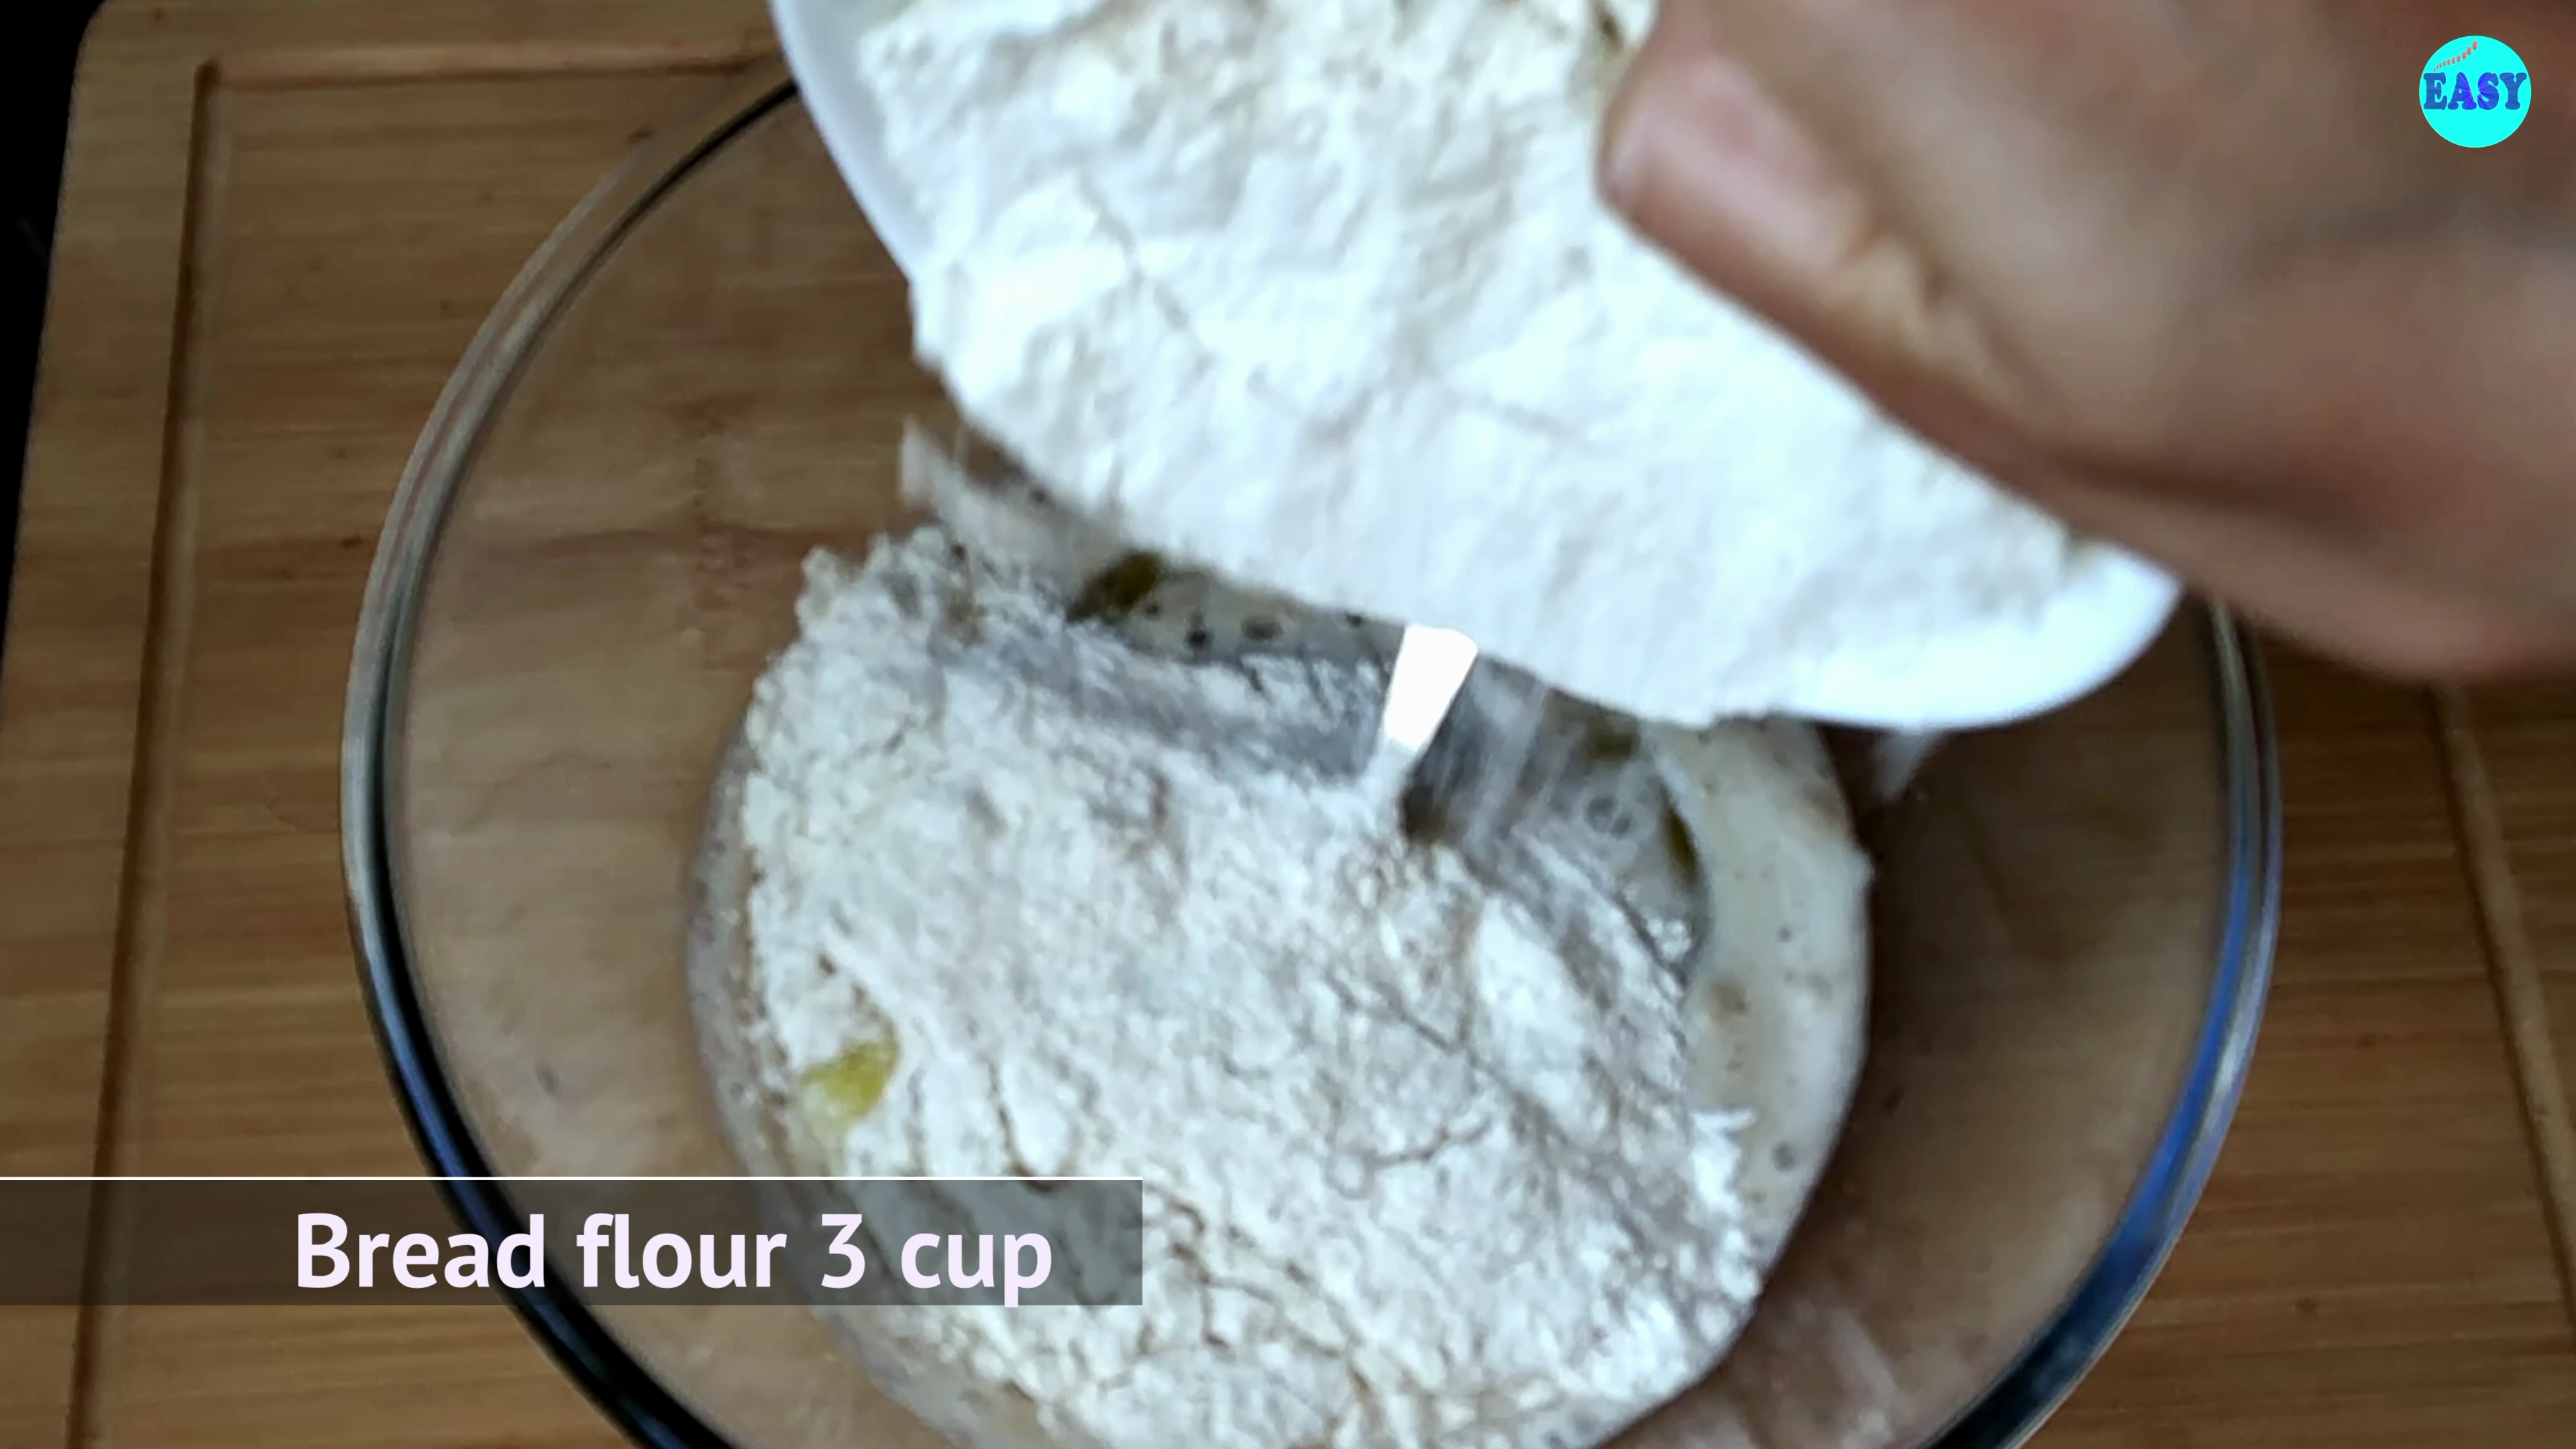 Step 2 - Once the mixture turns frothy add the olive oil, flour and salt, and mix until a dough forms.